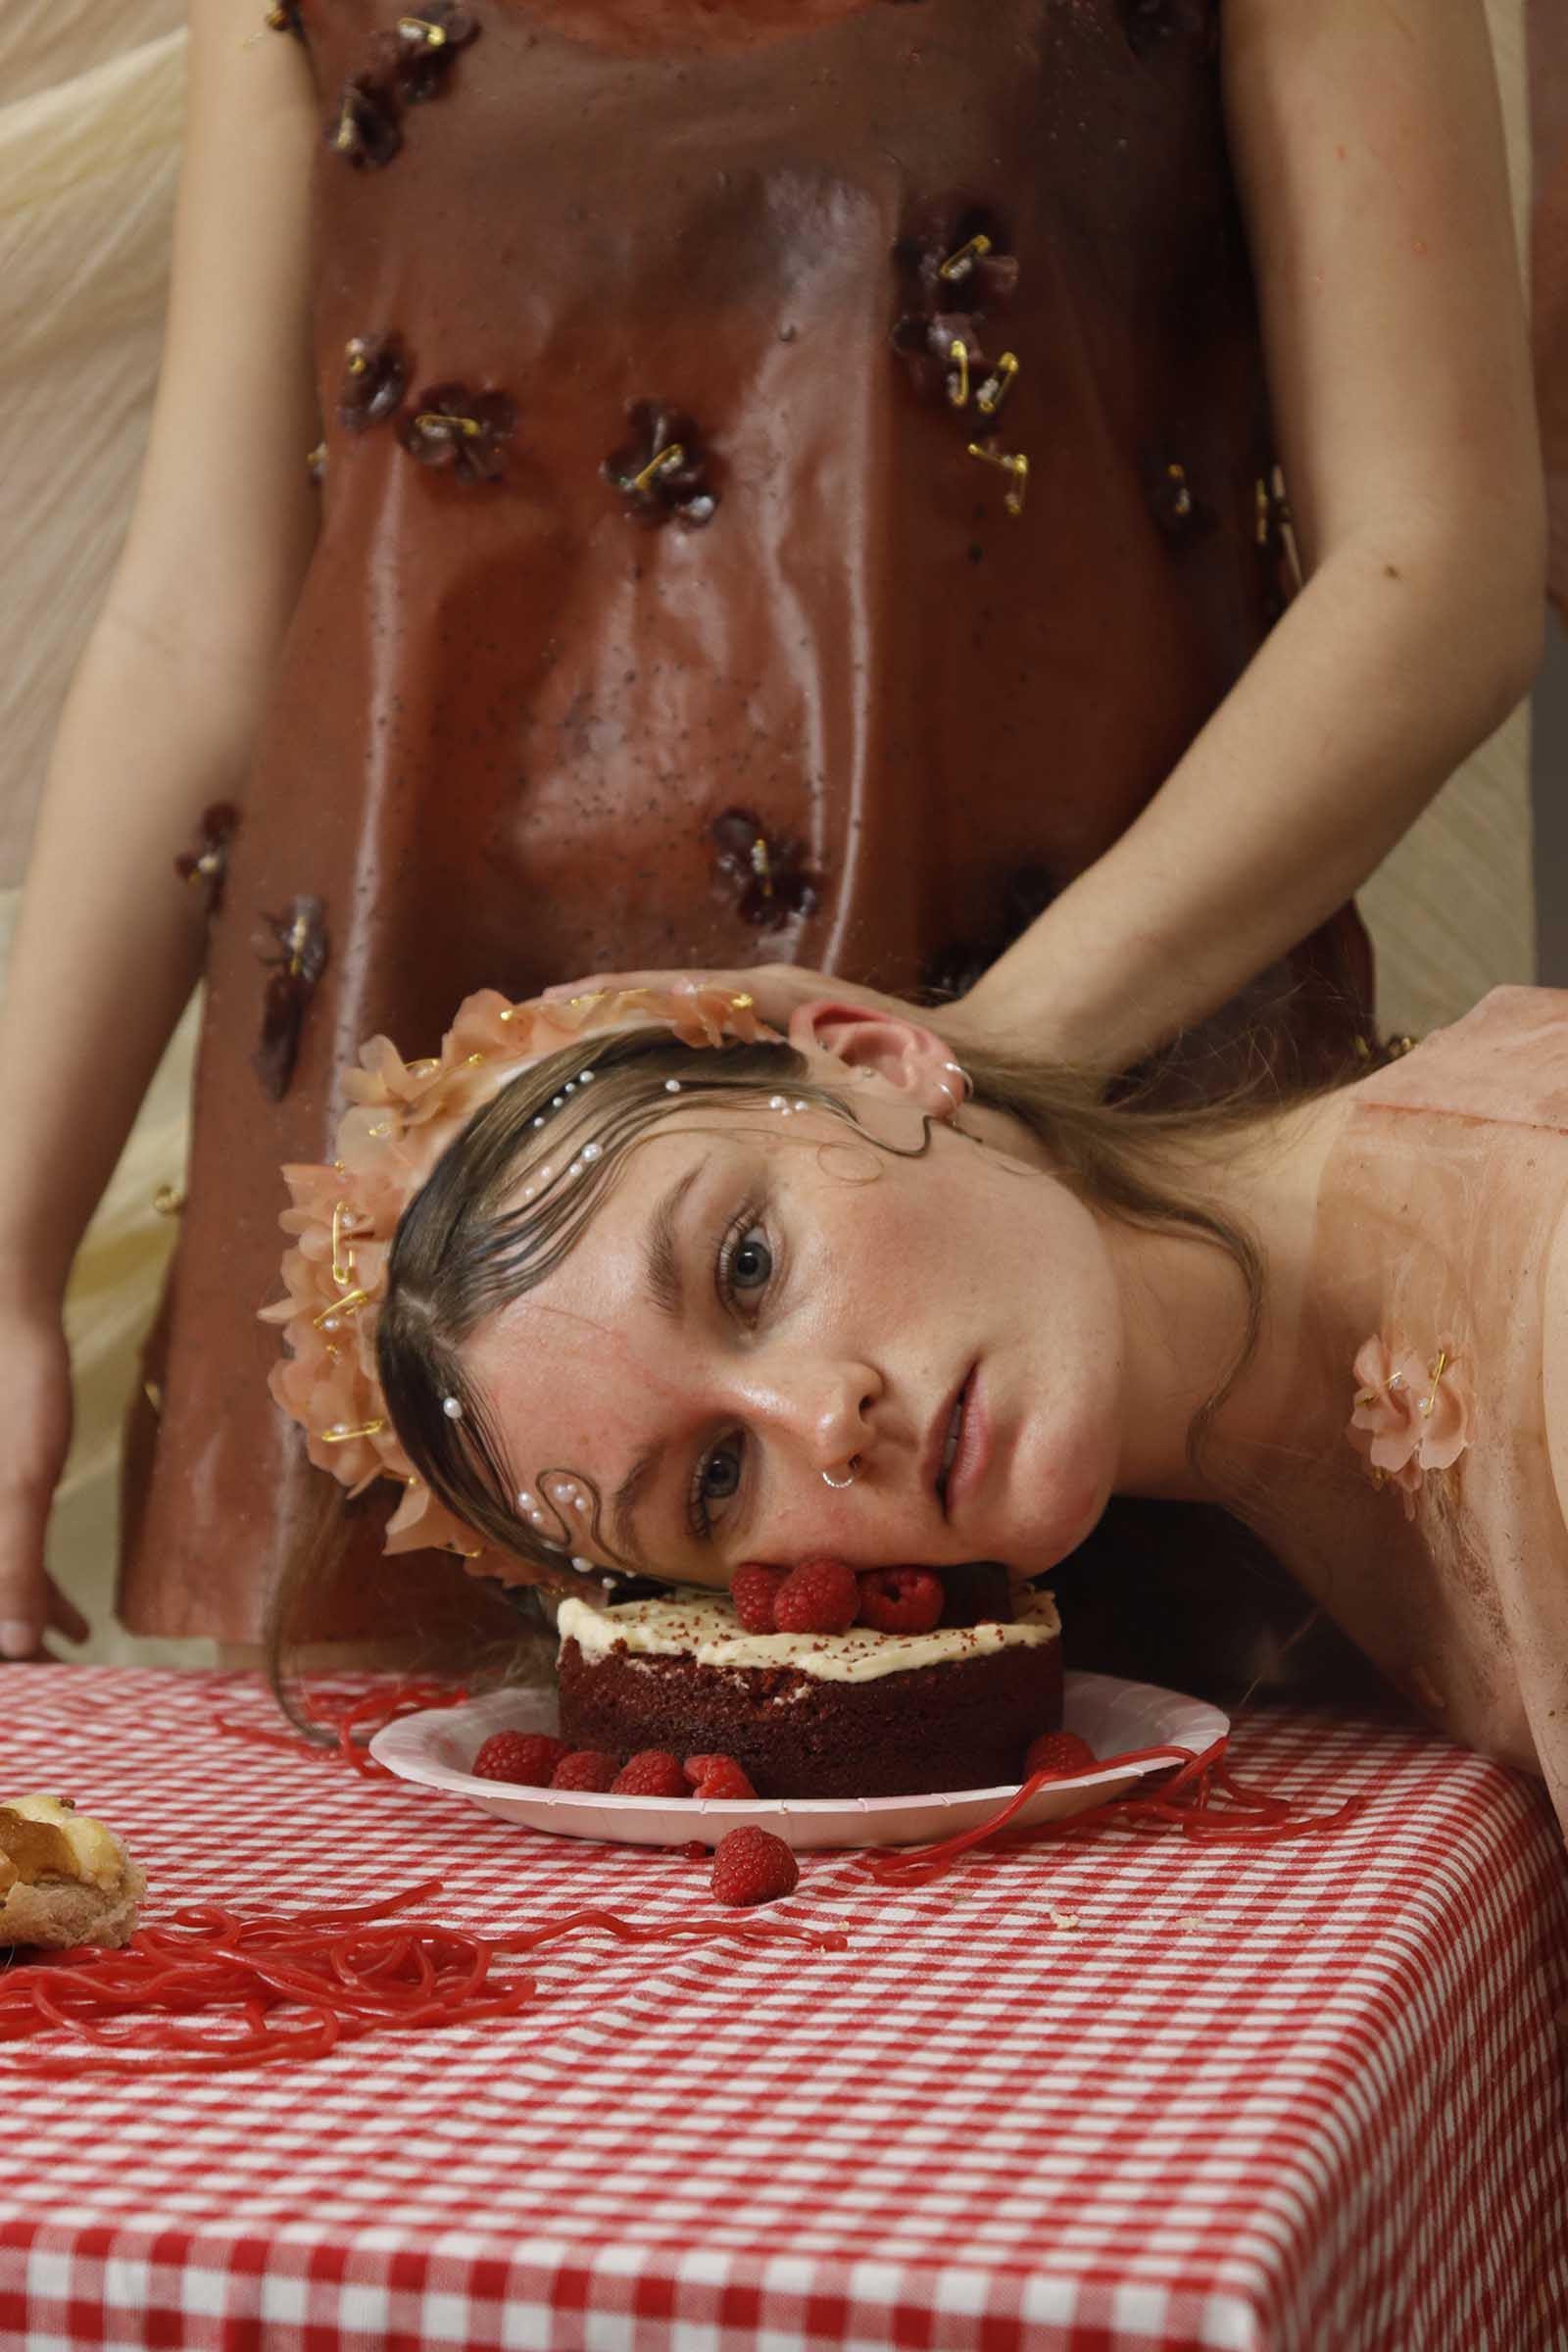 BA Fashion Design work by Mollie Green showing a young woman getting her faced pushed into a cake at a messy picnic scene